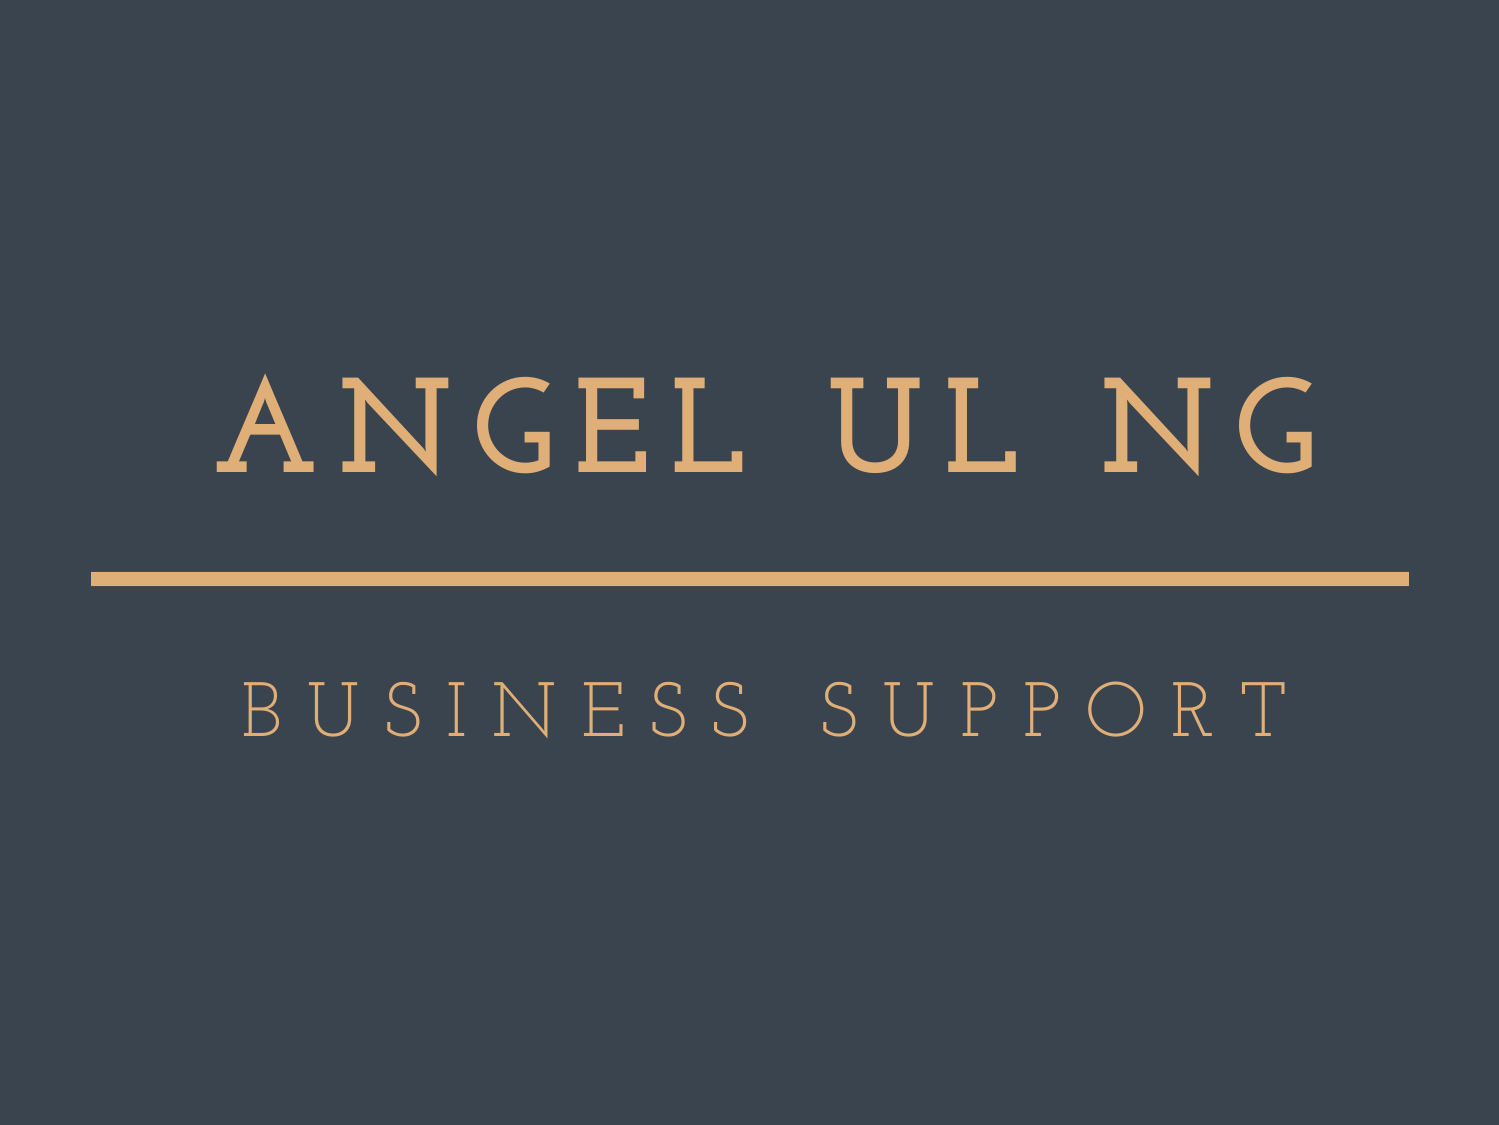 Angel UL Ng Business Support